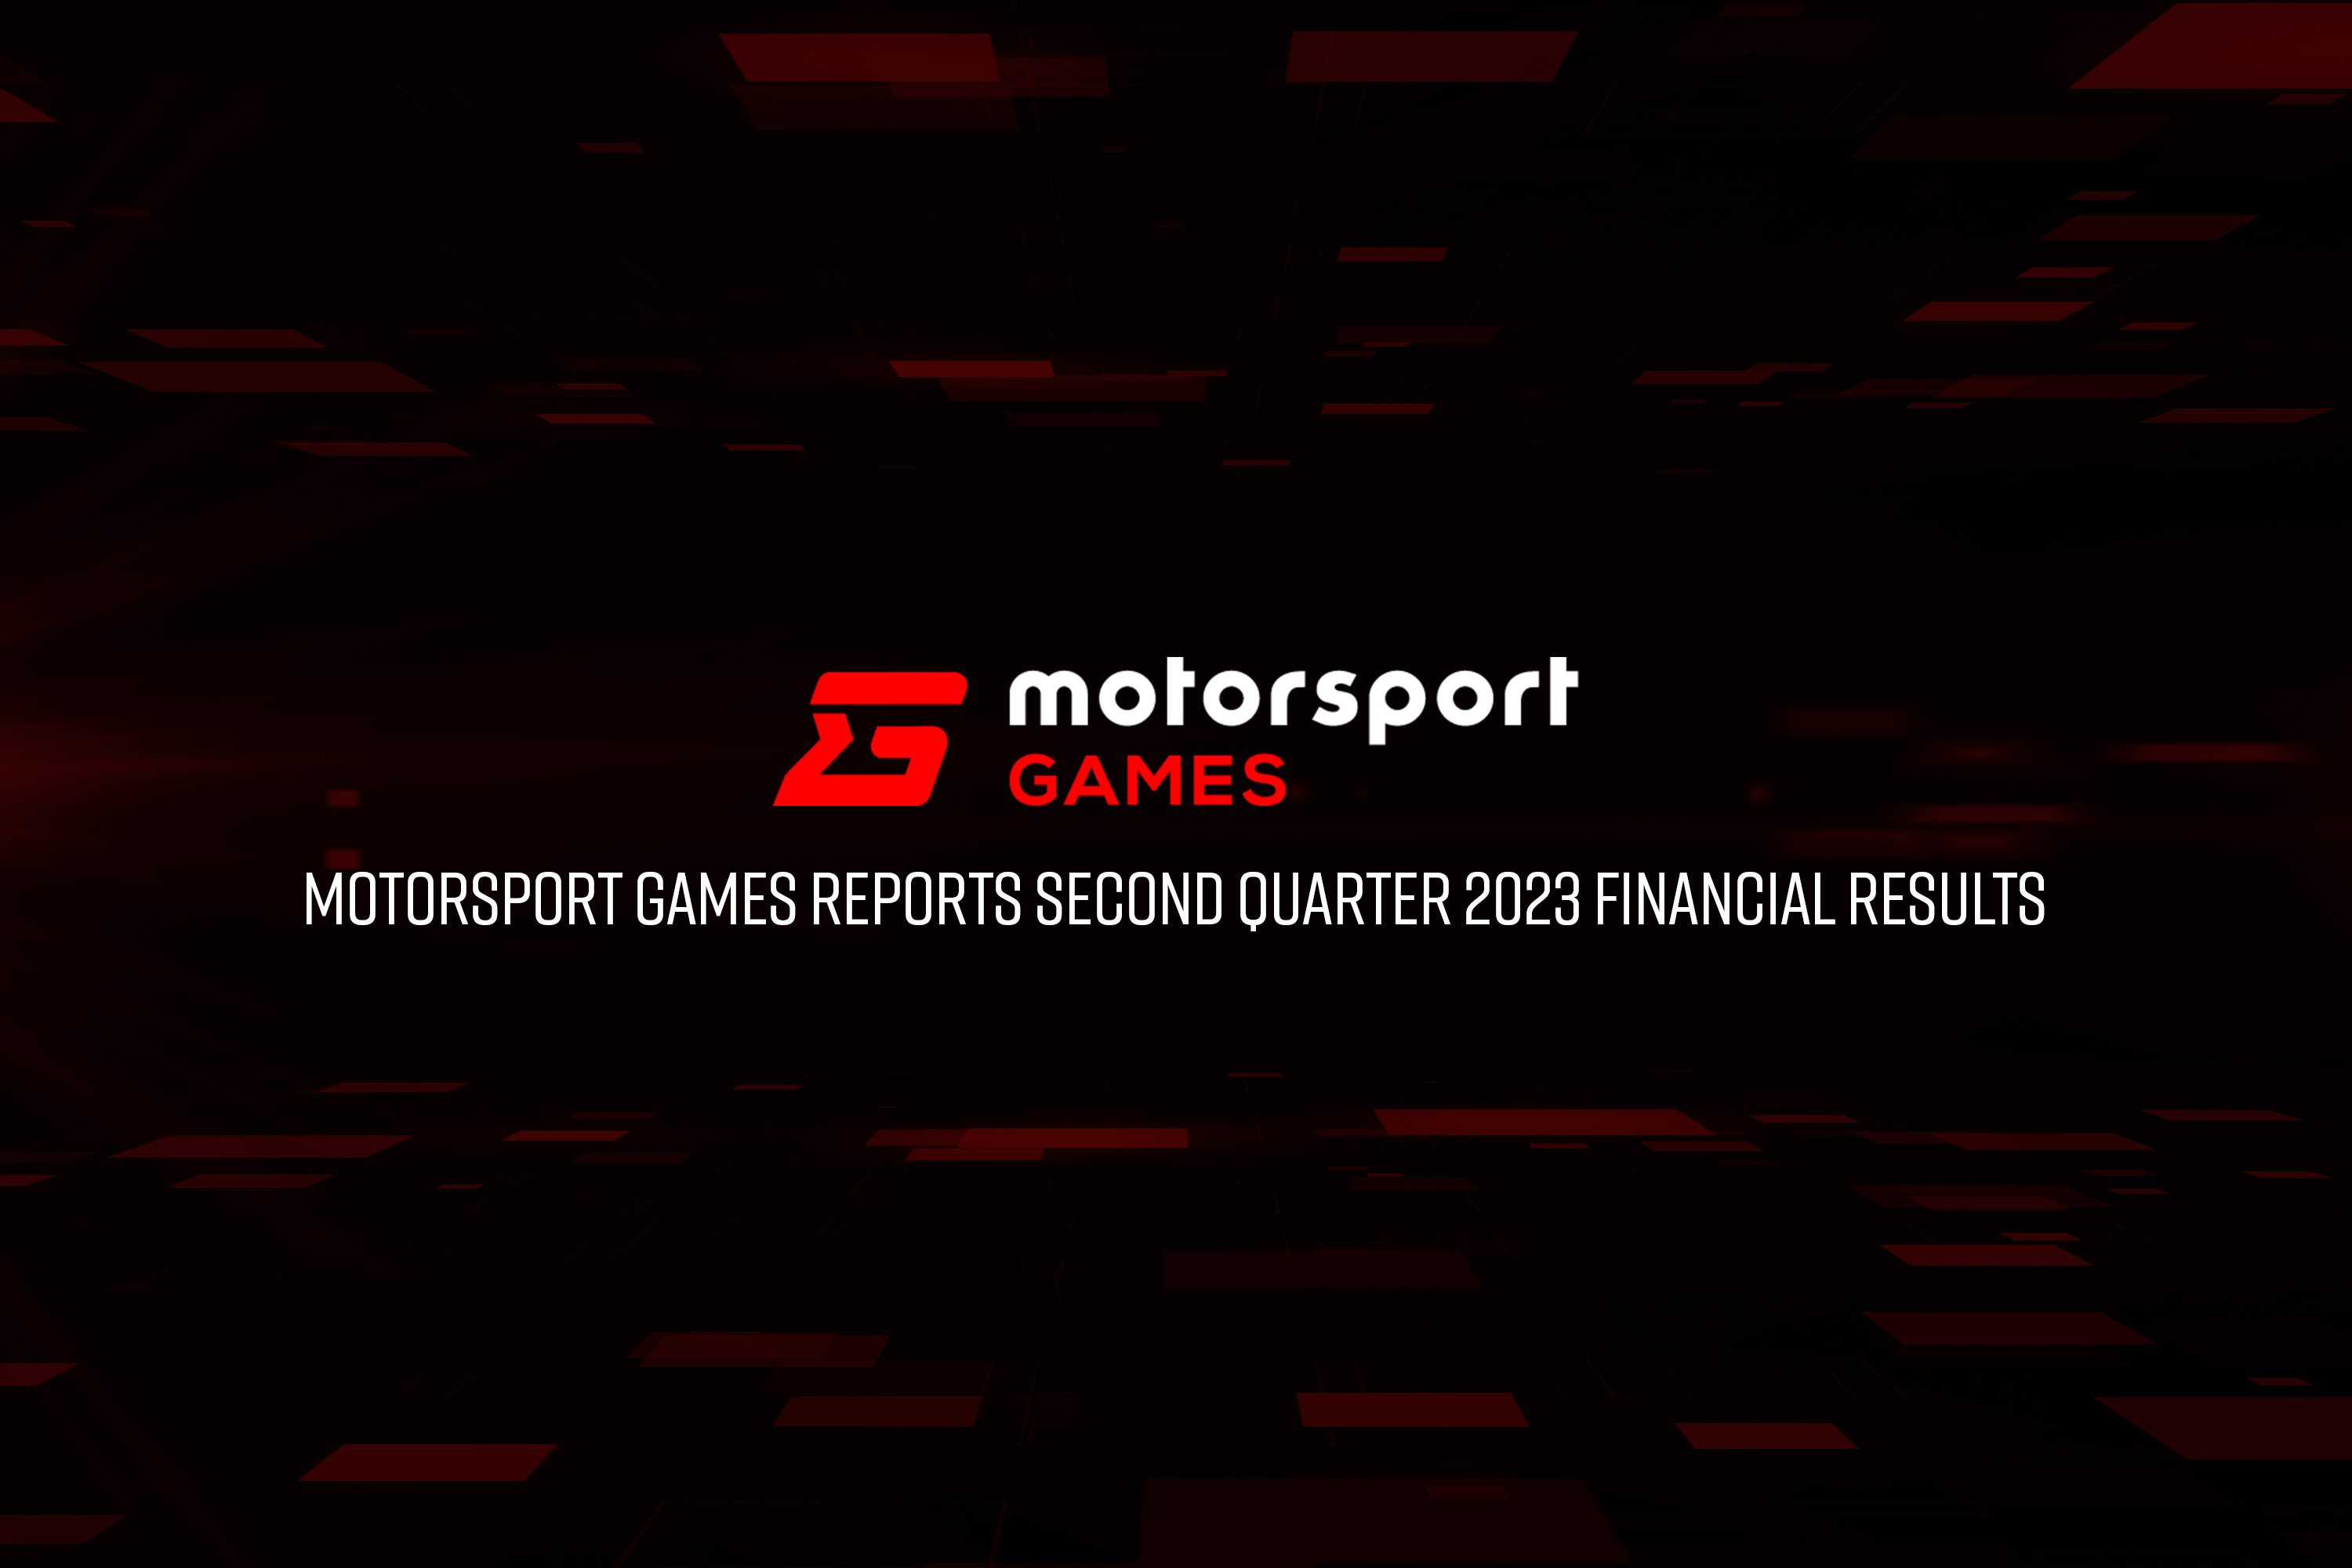 Motorsport Games Reports Q2 2023 Financial Results